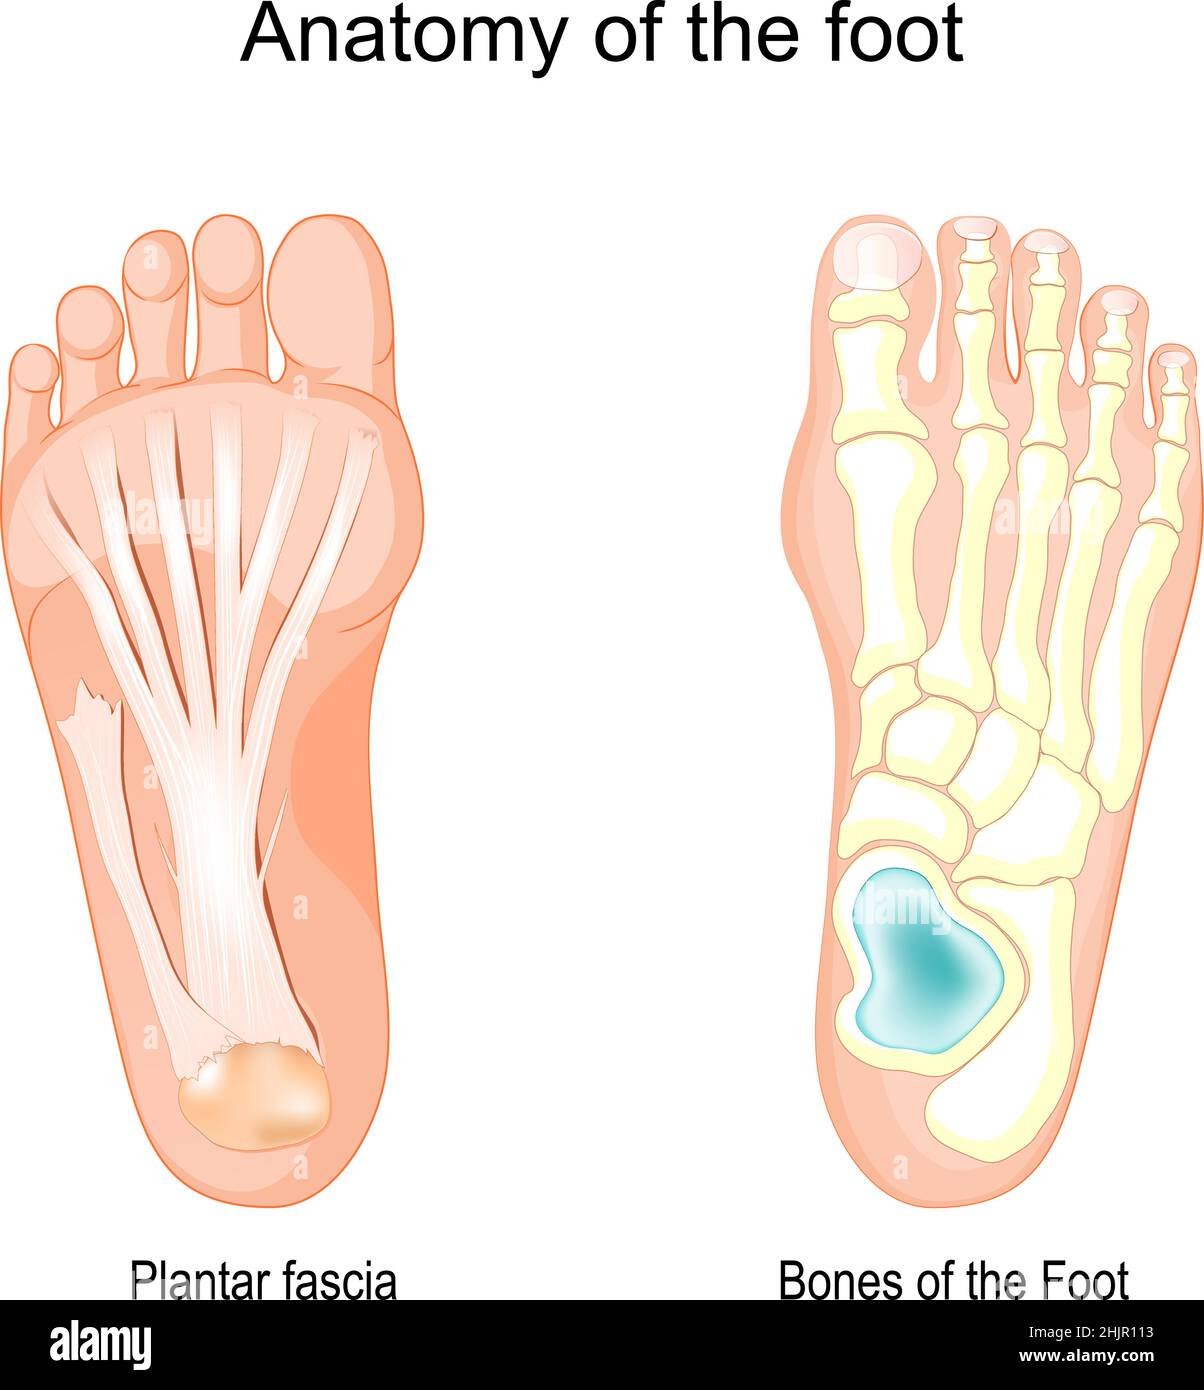 Anatomy of the foot. Bones of the Foot and Plantar fascia. Vector illustration Stock Vector